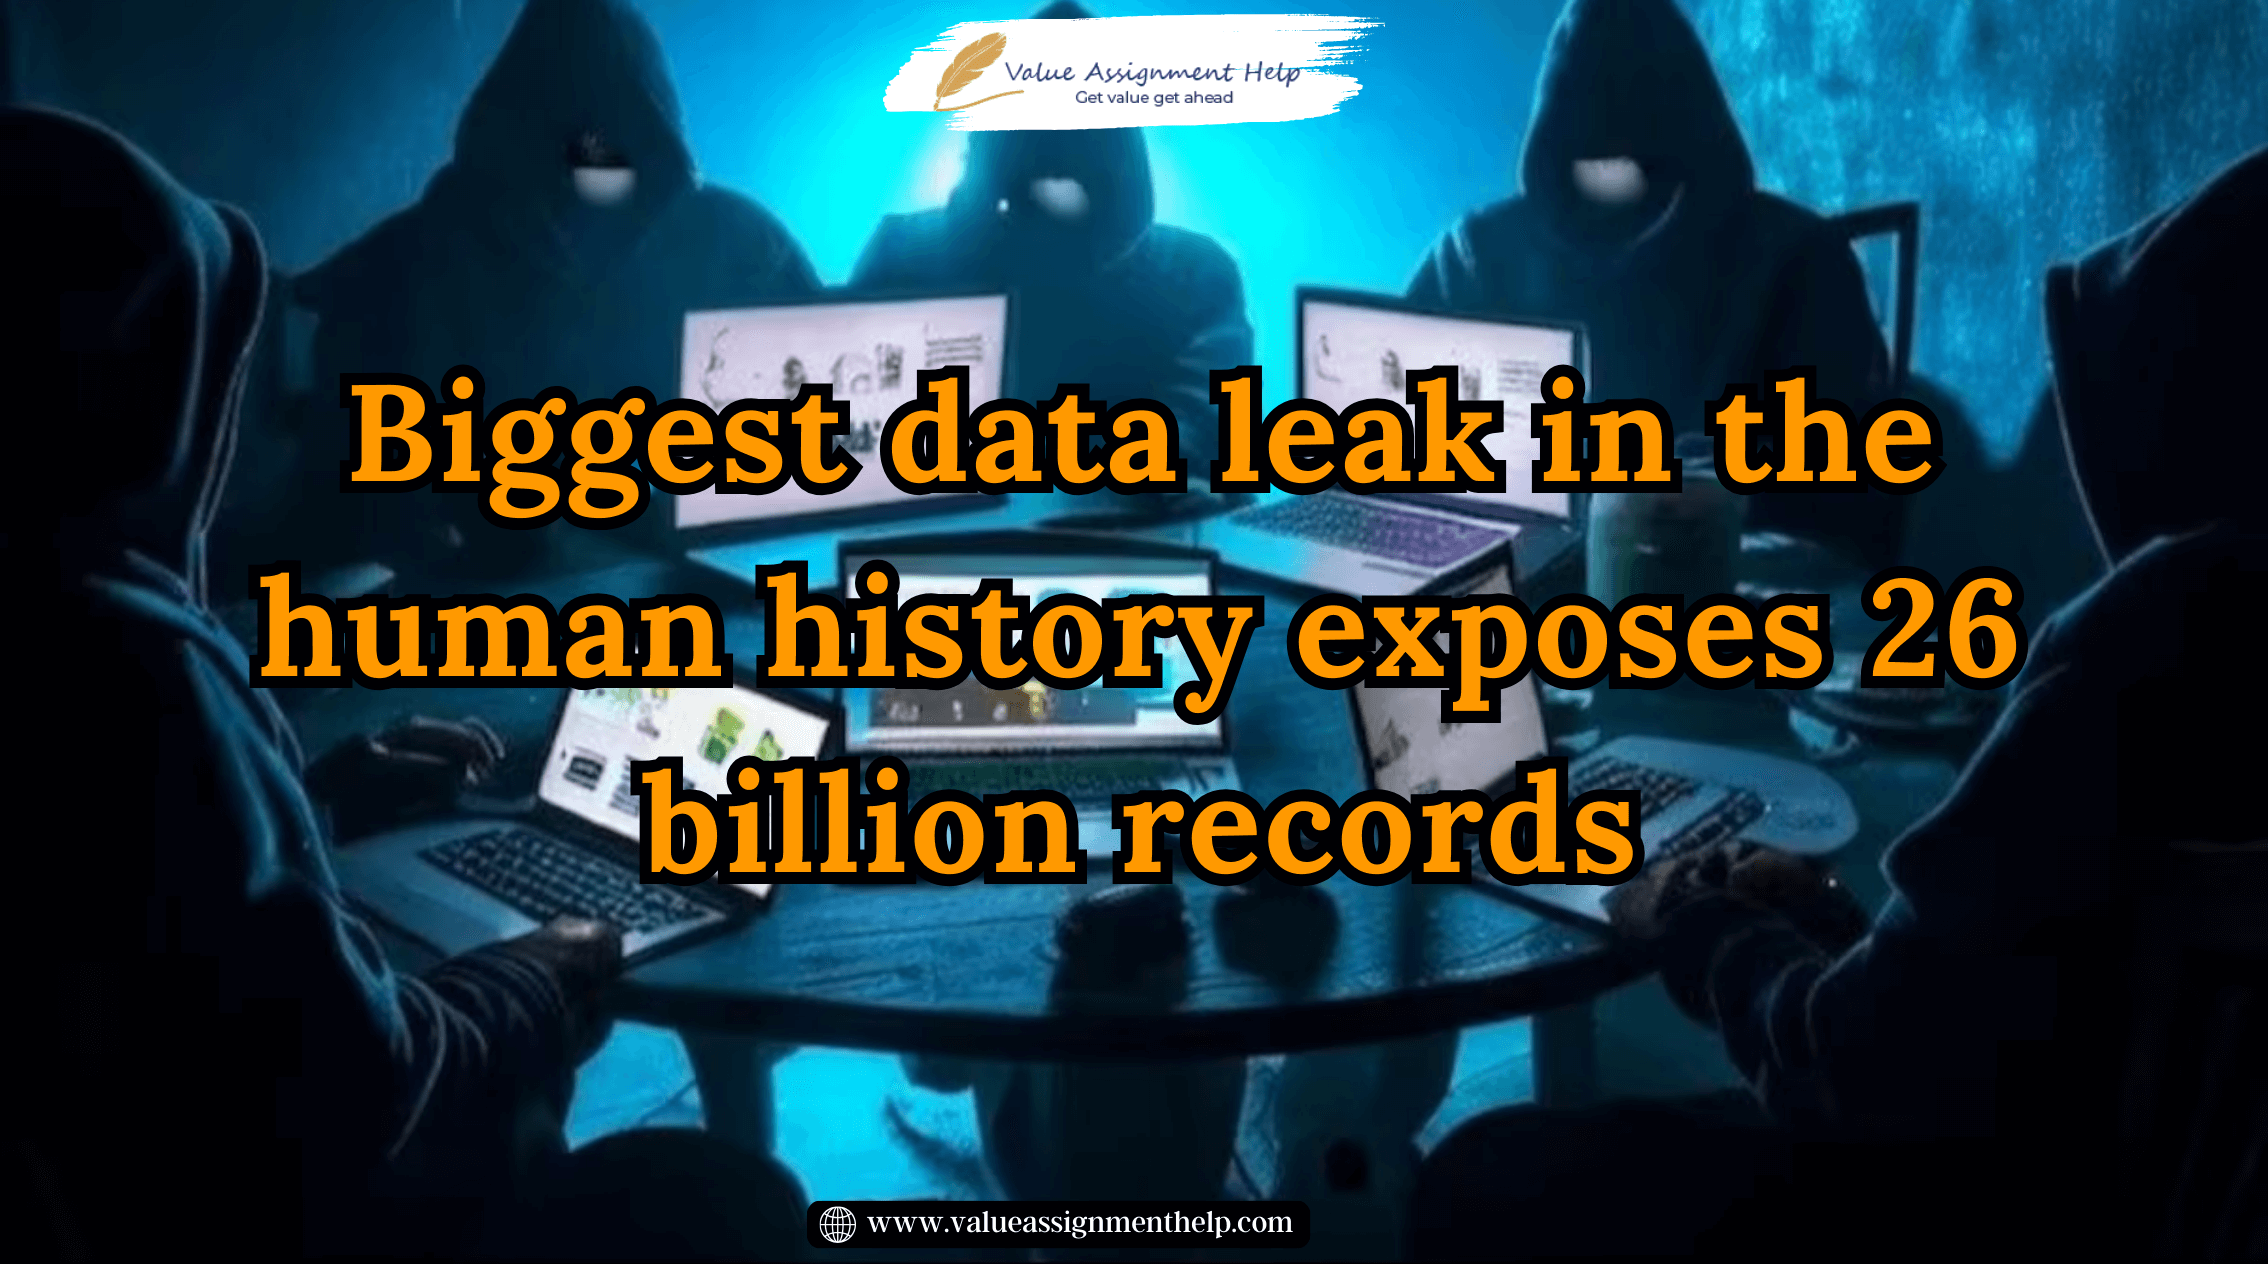  Biggest Data Leak in The Human History Exposes 26 Billion Records